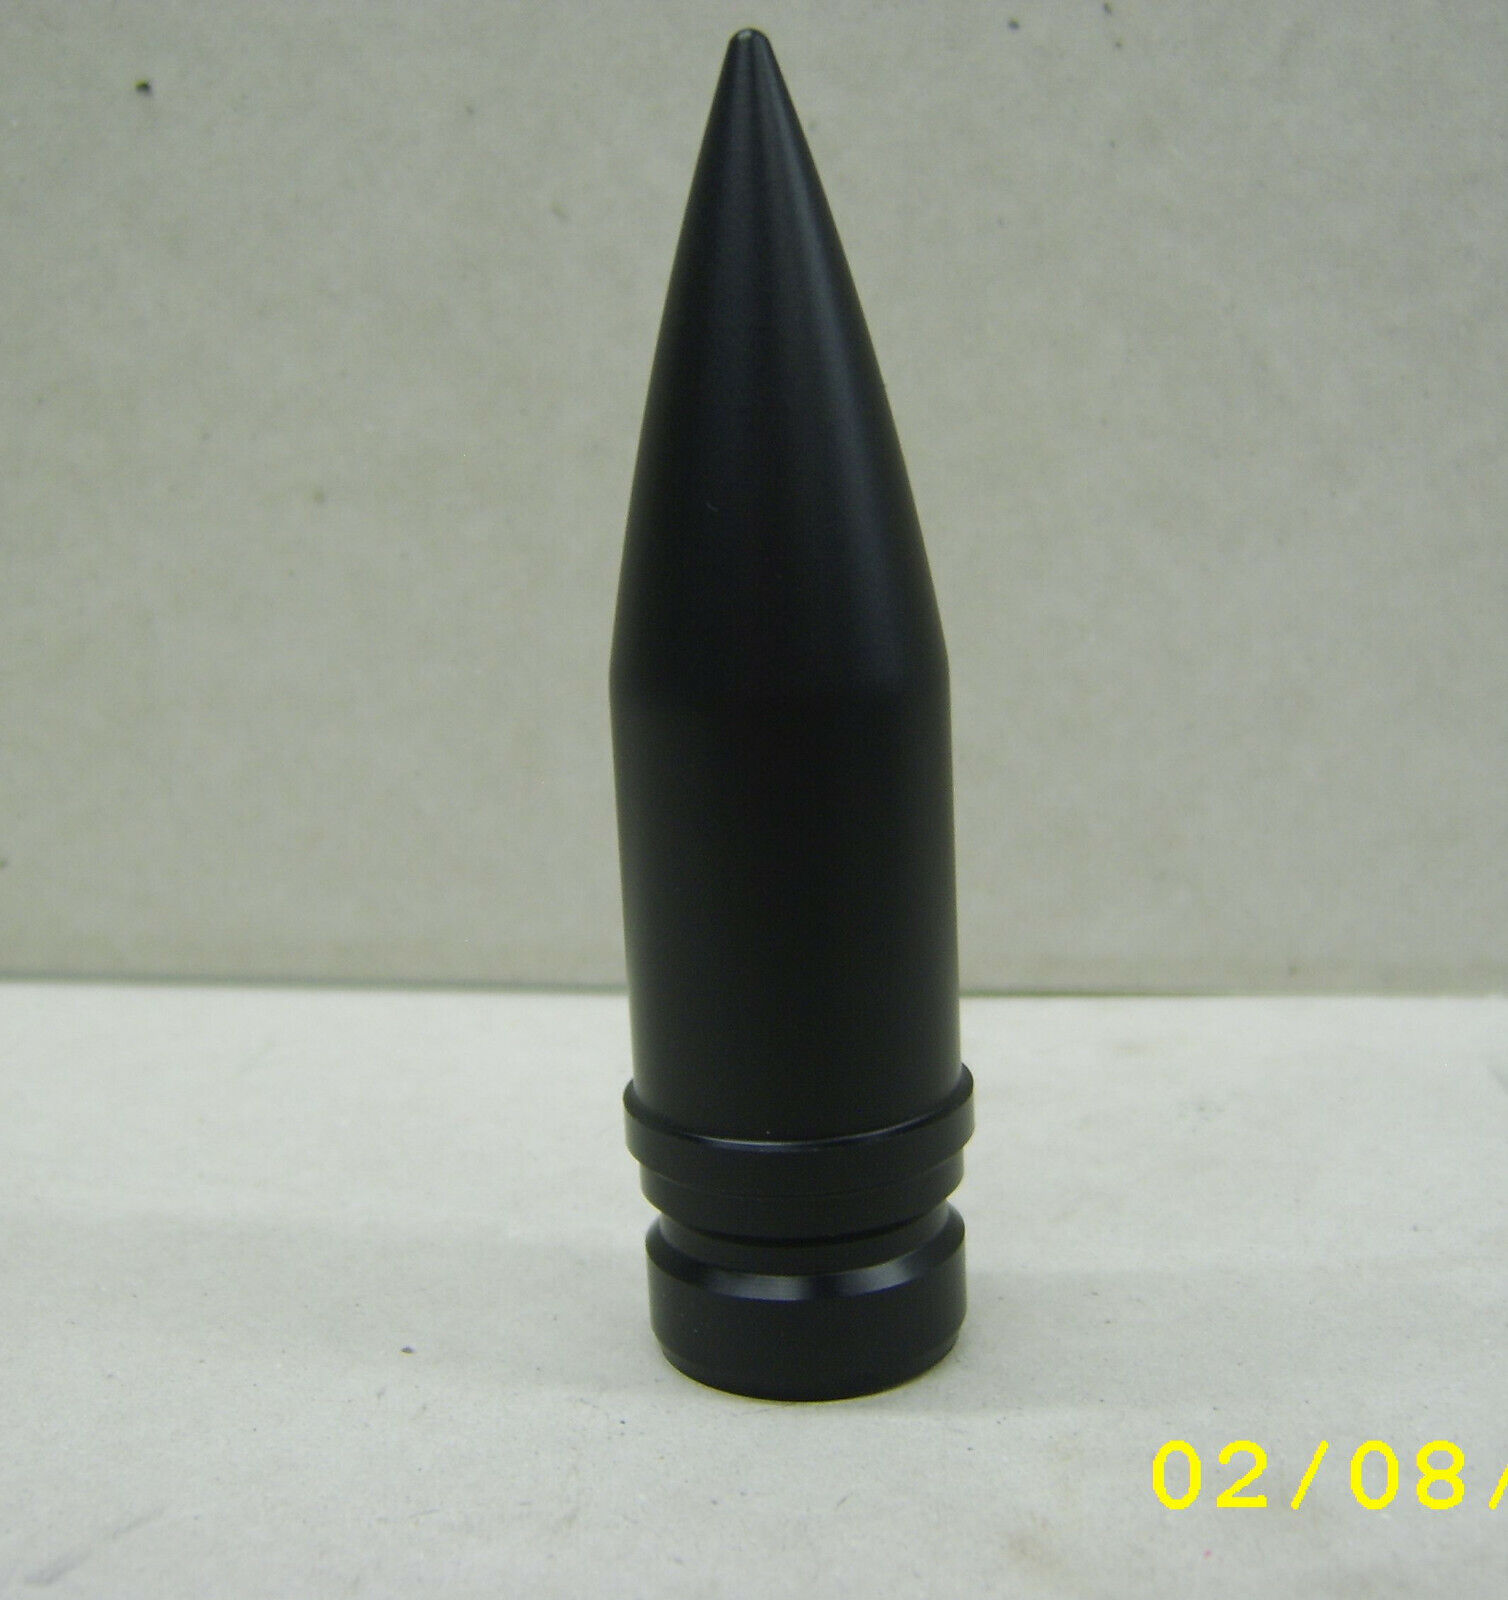 25mm Replica projectile, machined solid, Black Plastic, type 2 point